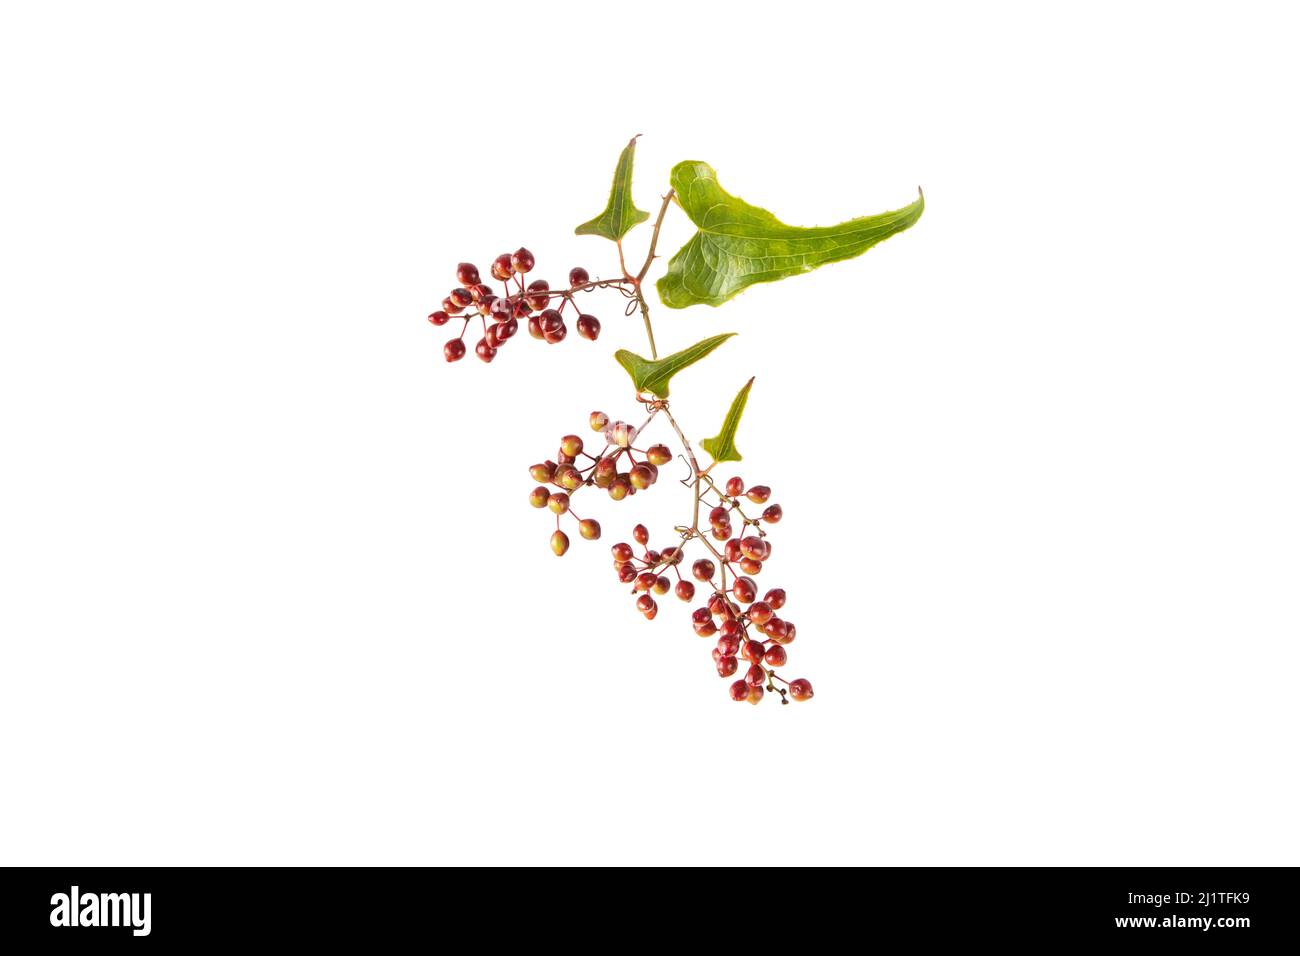 Jamaican or Honduran sarsaparilla branch with leaves and berries. Smilax ornata isolated on white Stock Photo